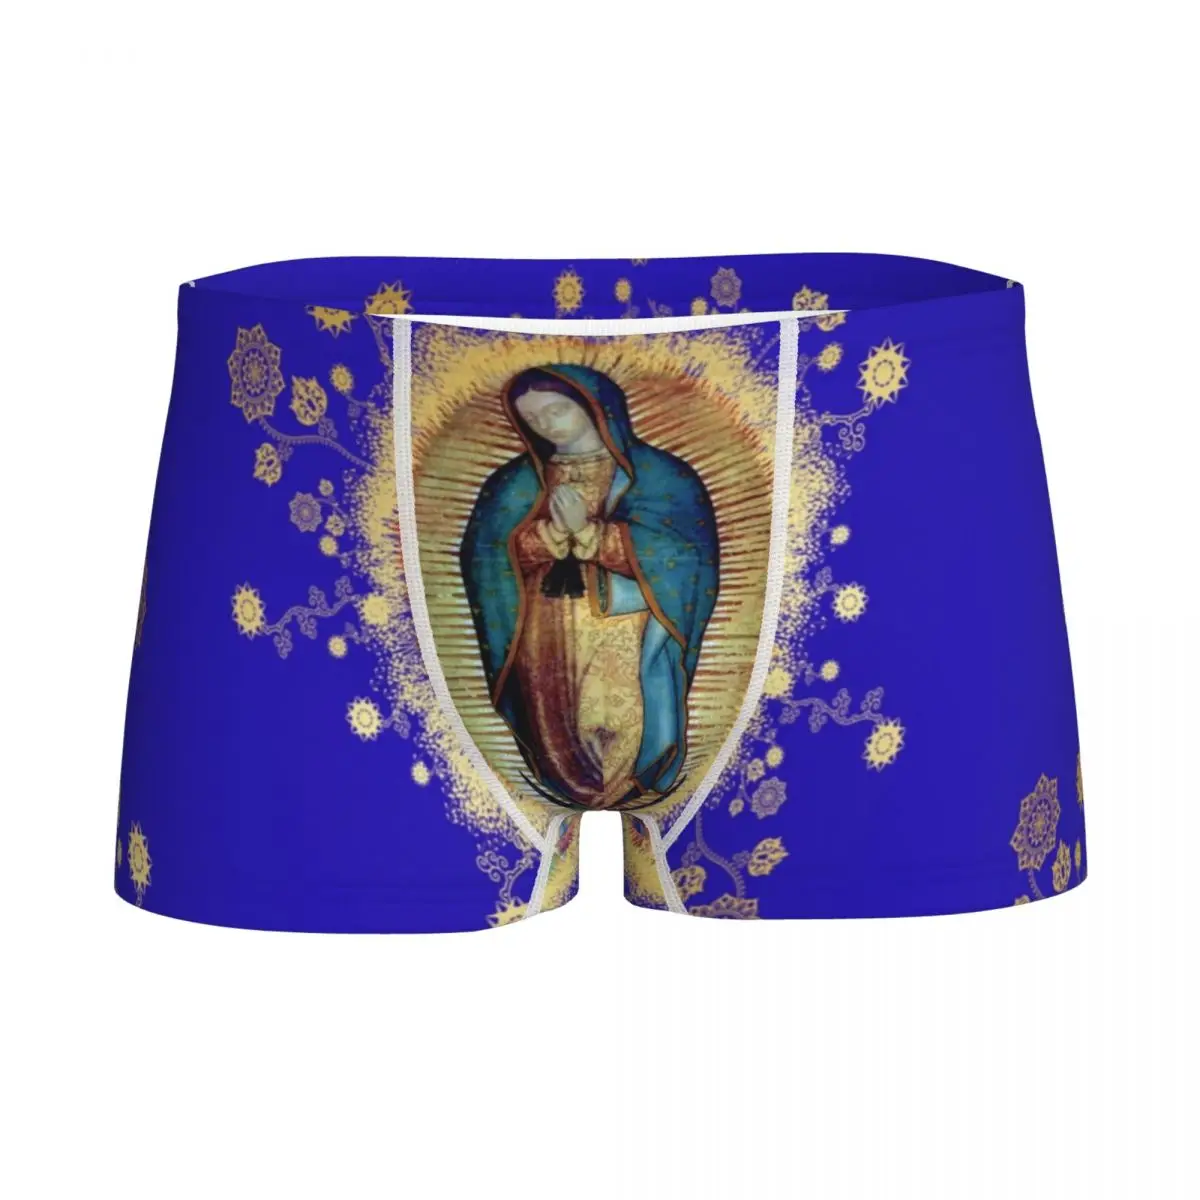 

Children's Boys Underwear Our Lady Of Guadalupe Mexican Virgin Mary Mexico Youth Panties Boxers Teenagers Cotton Underpants